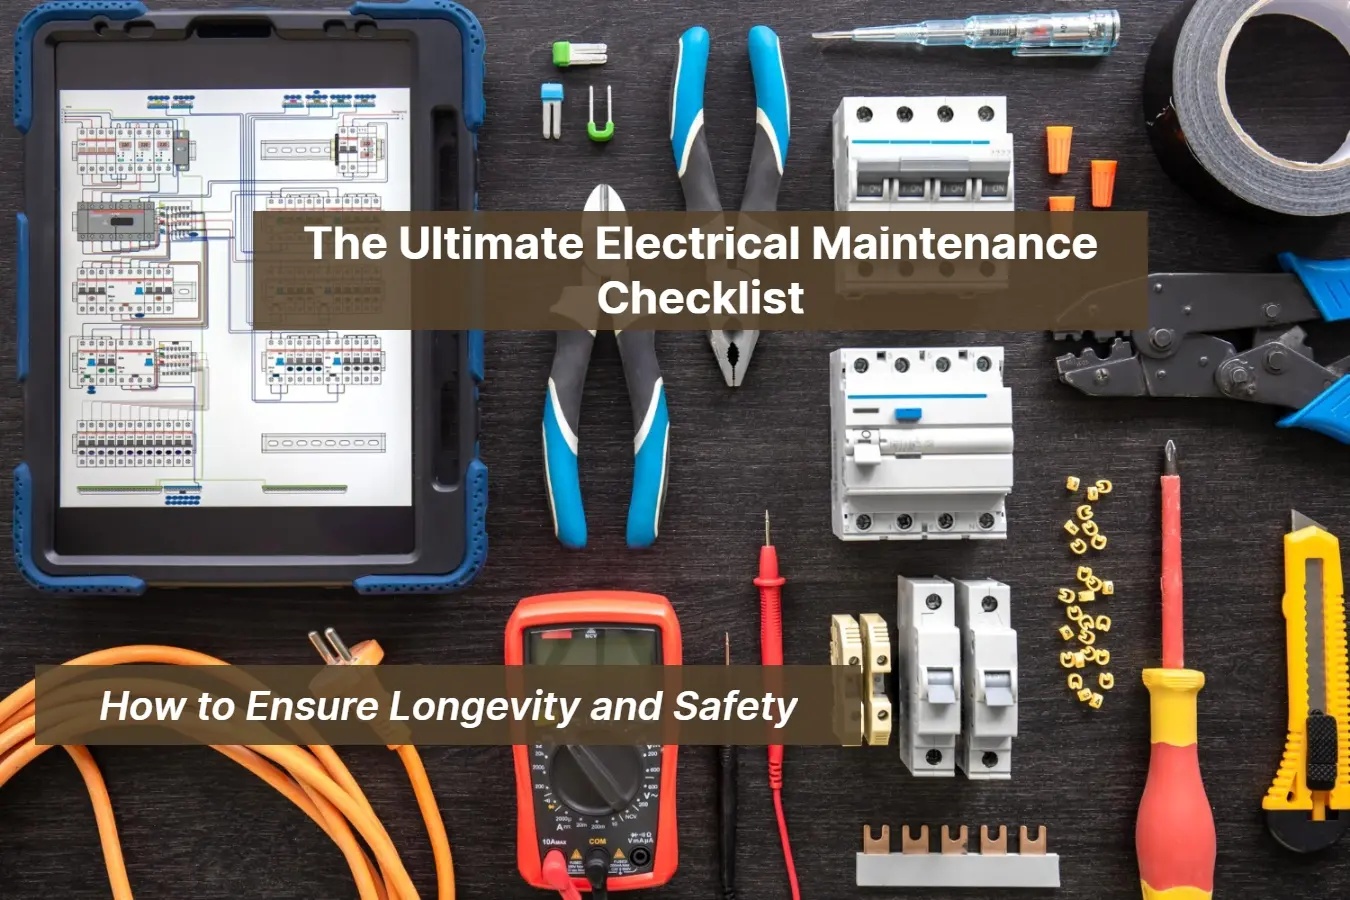 The Ultimate Electrical Maintenance Checklist How to Ensure Longevity and Safety